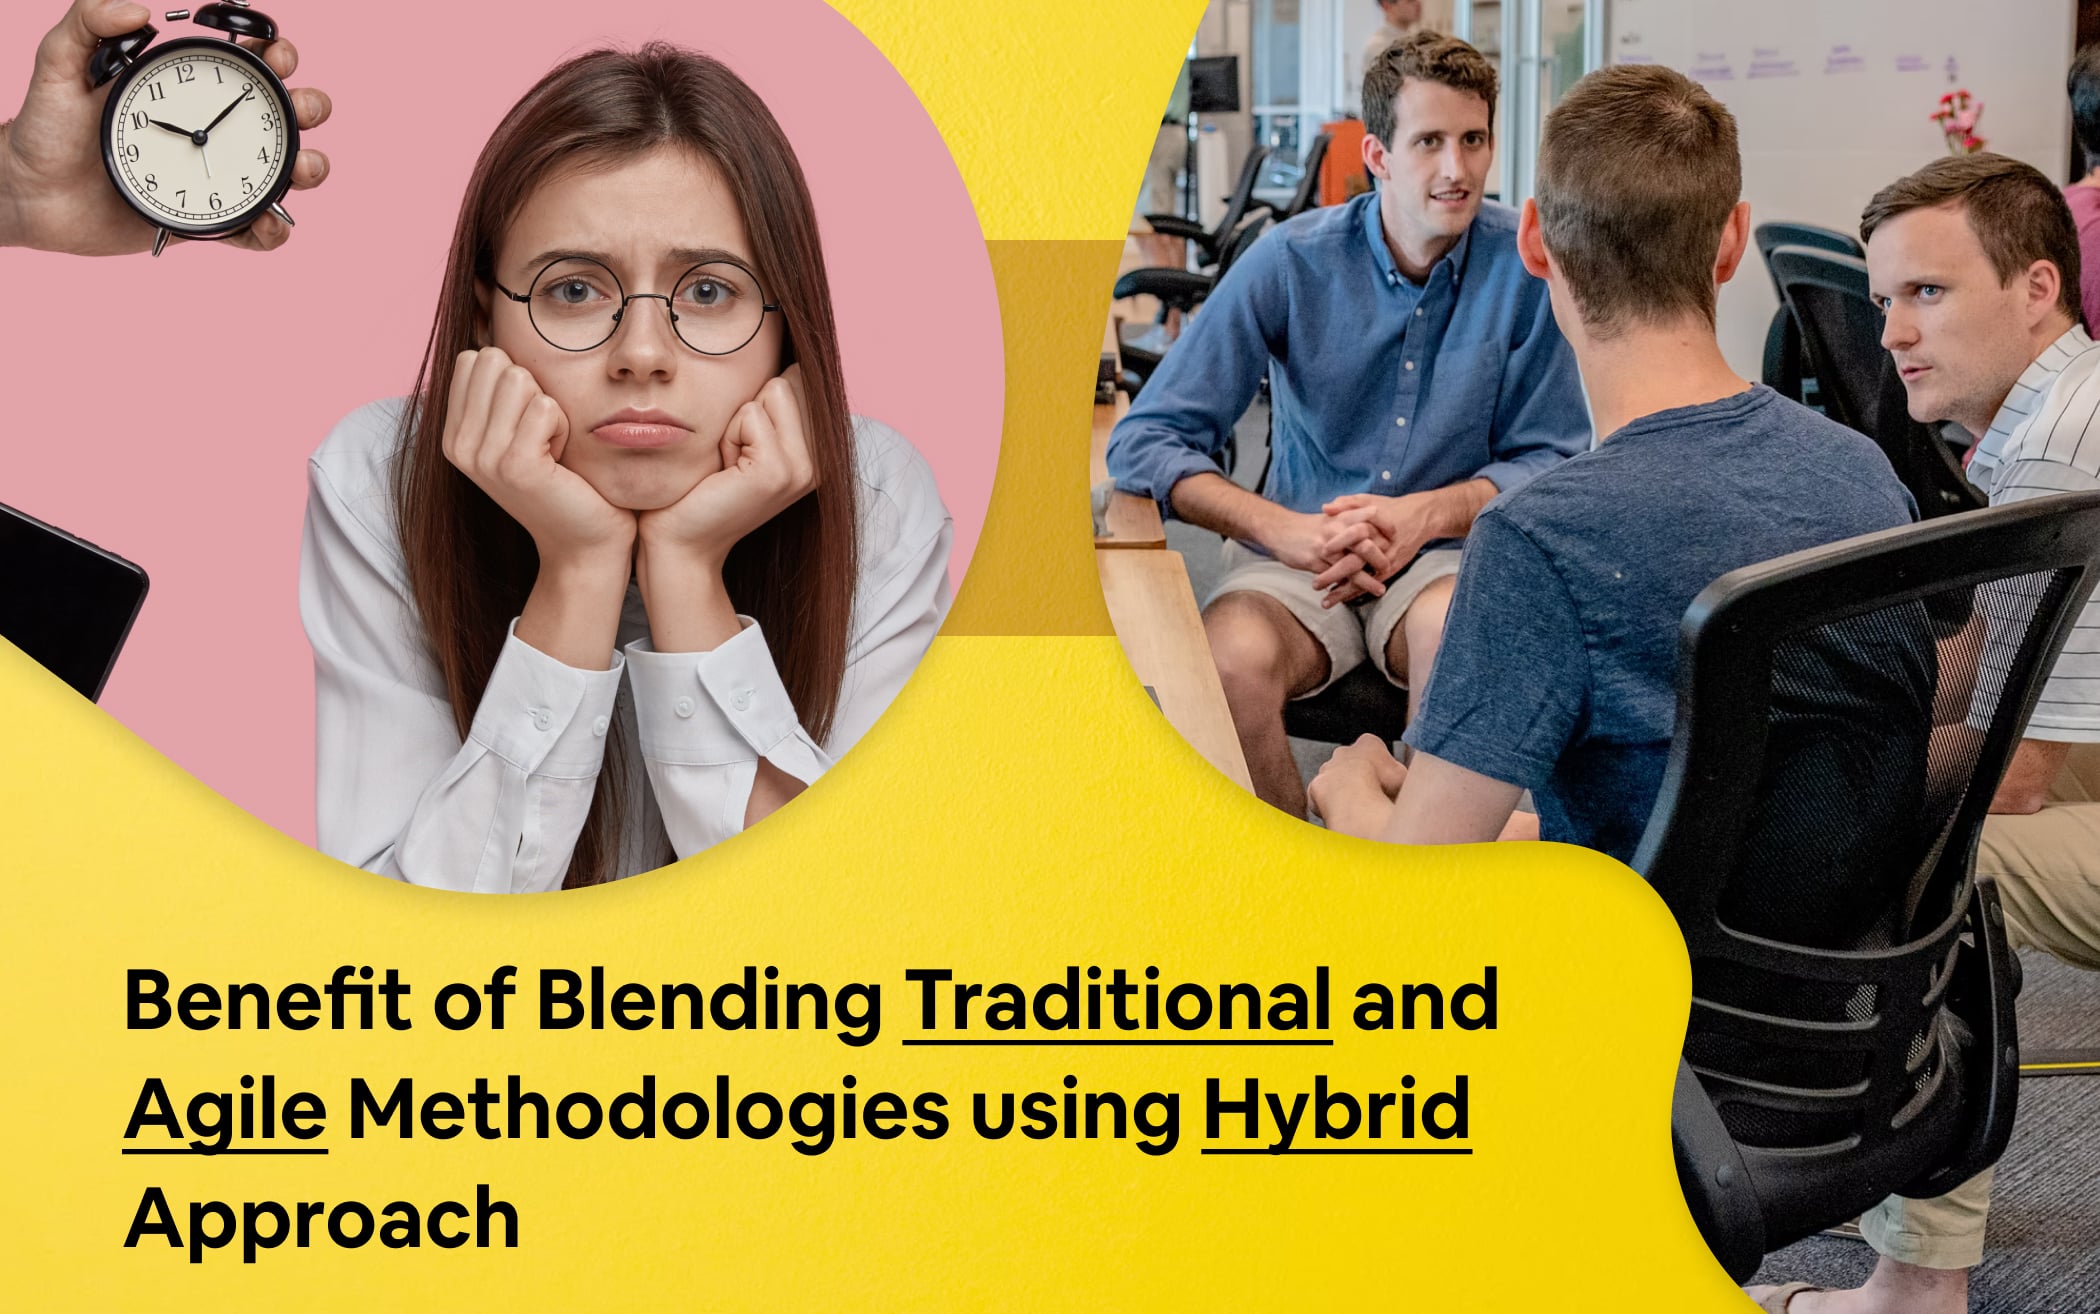 Benefit of Blending Traditional and Agile Methodologies using Hybrid Approach